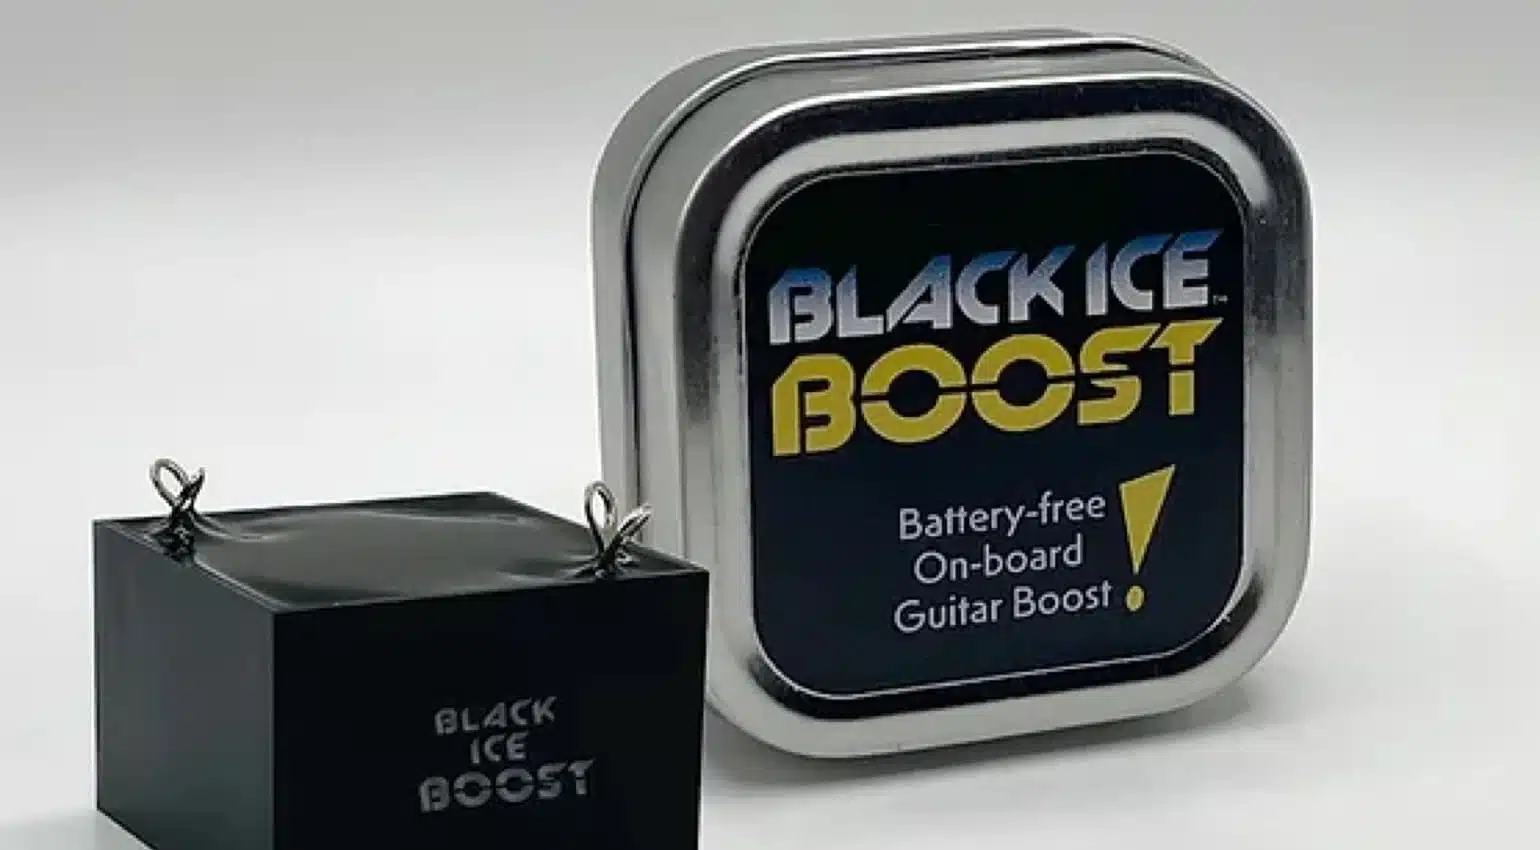 Black Ice Boost, Black Ice Distort, guitar effects, bass effects, battery-free, overdrive, boost